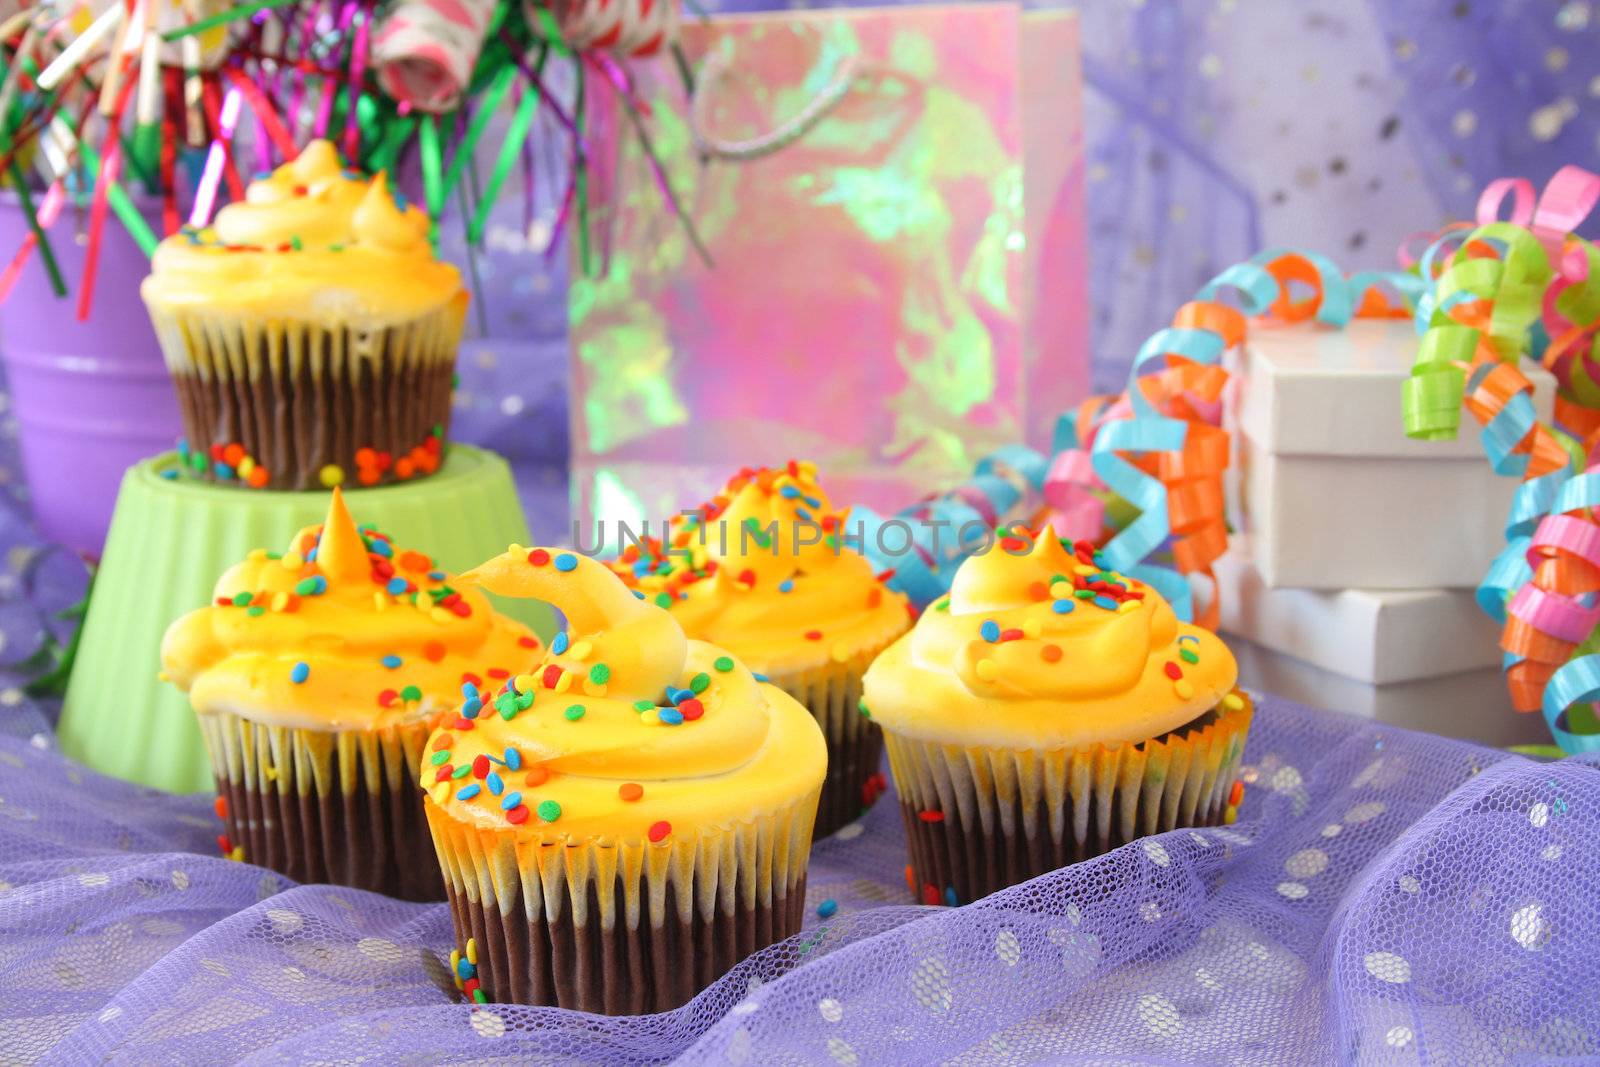 Cupcakes at a birthday party or event.